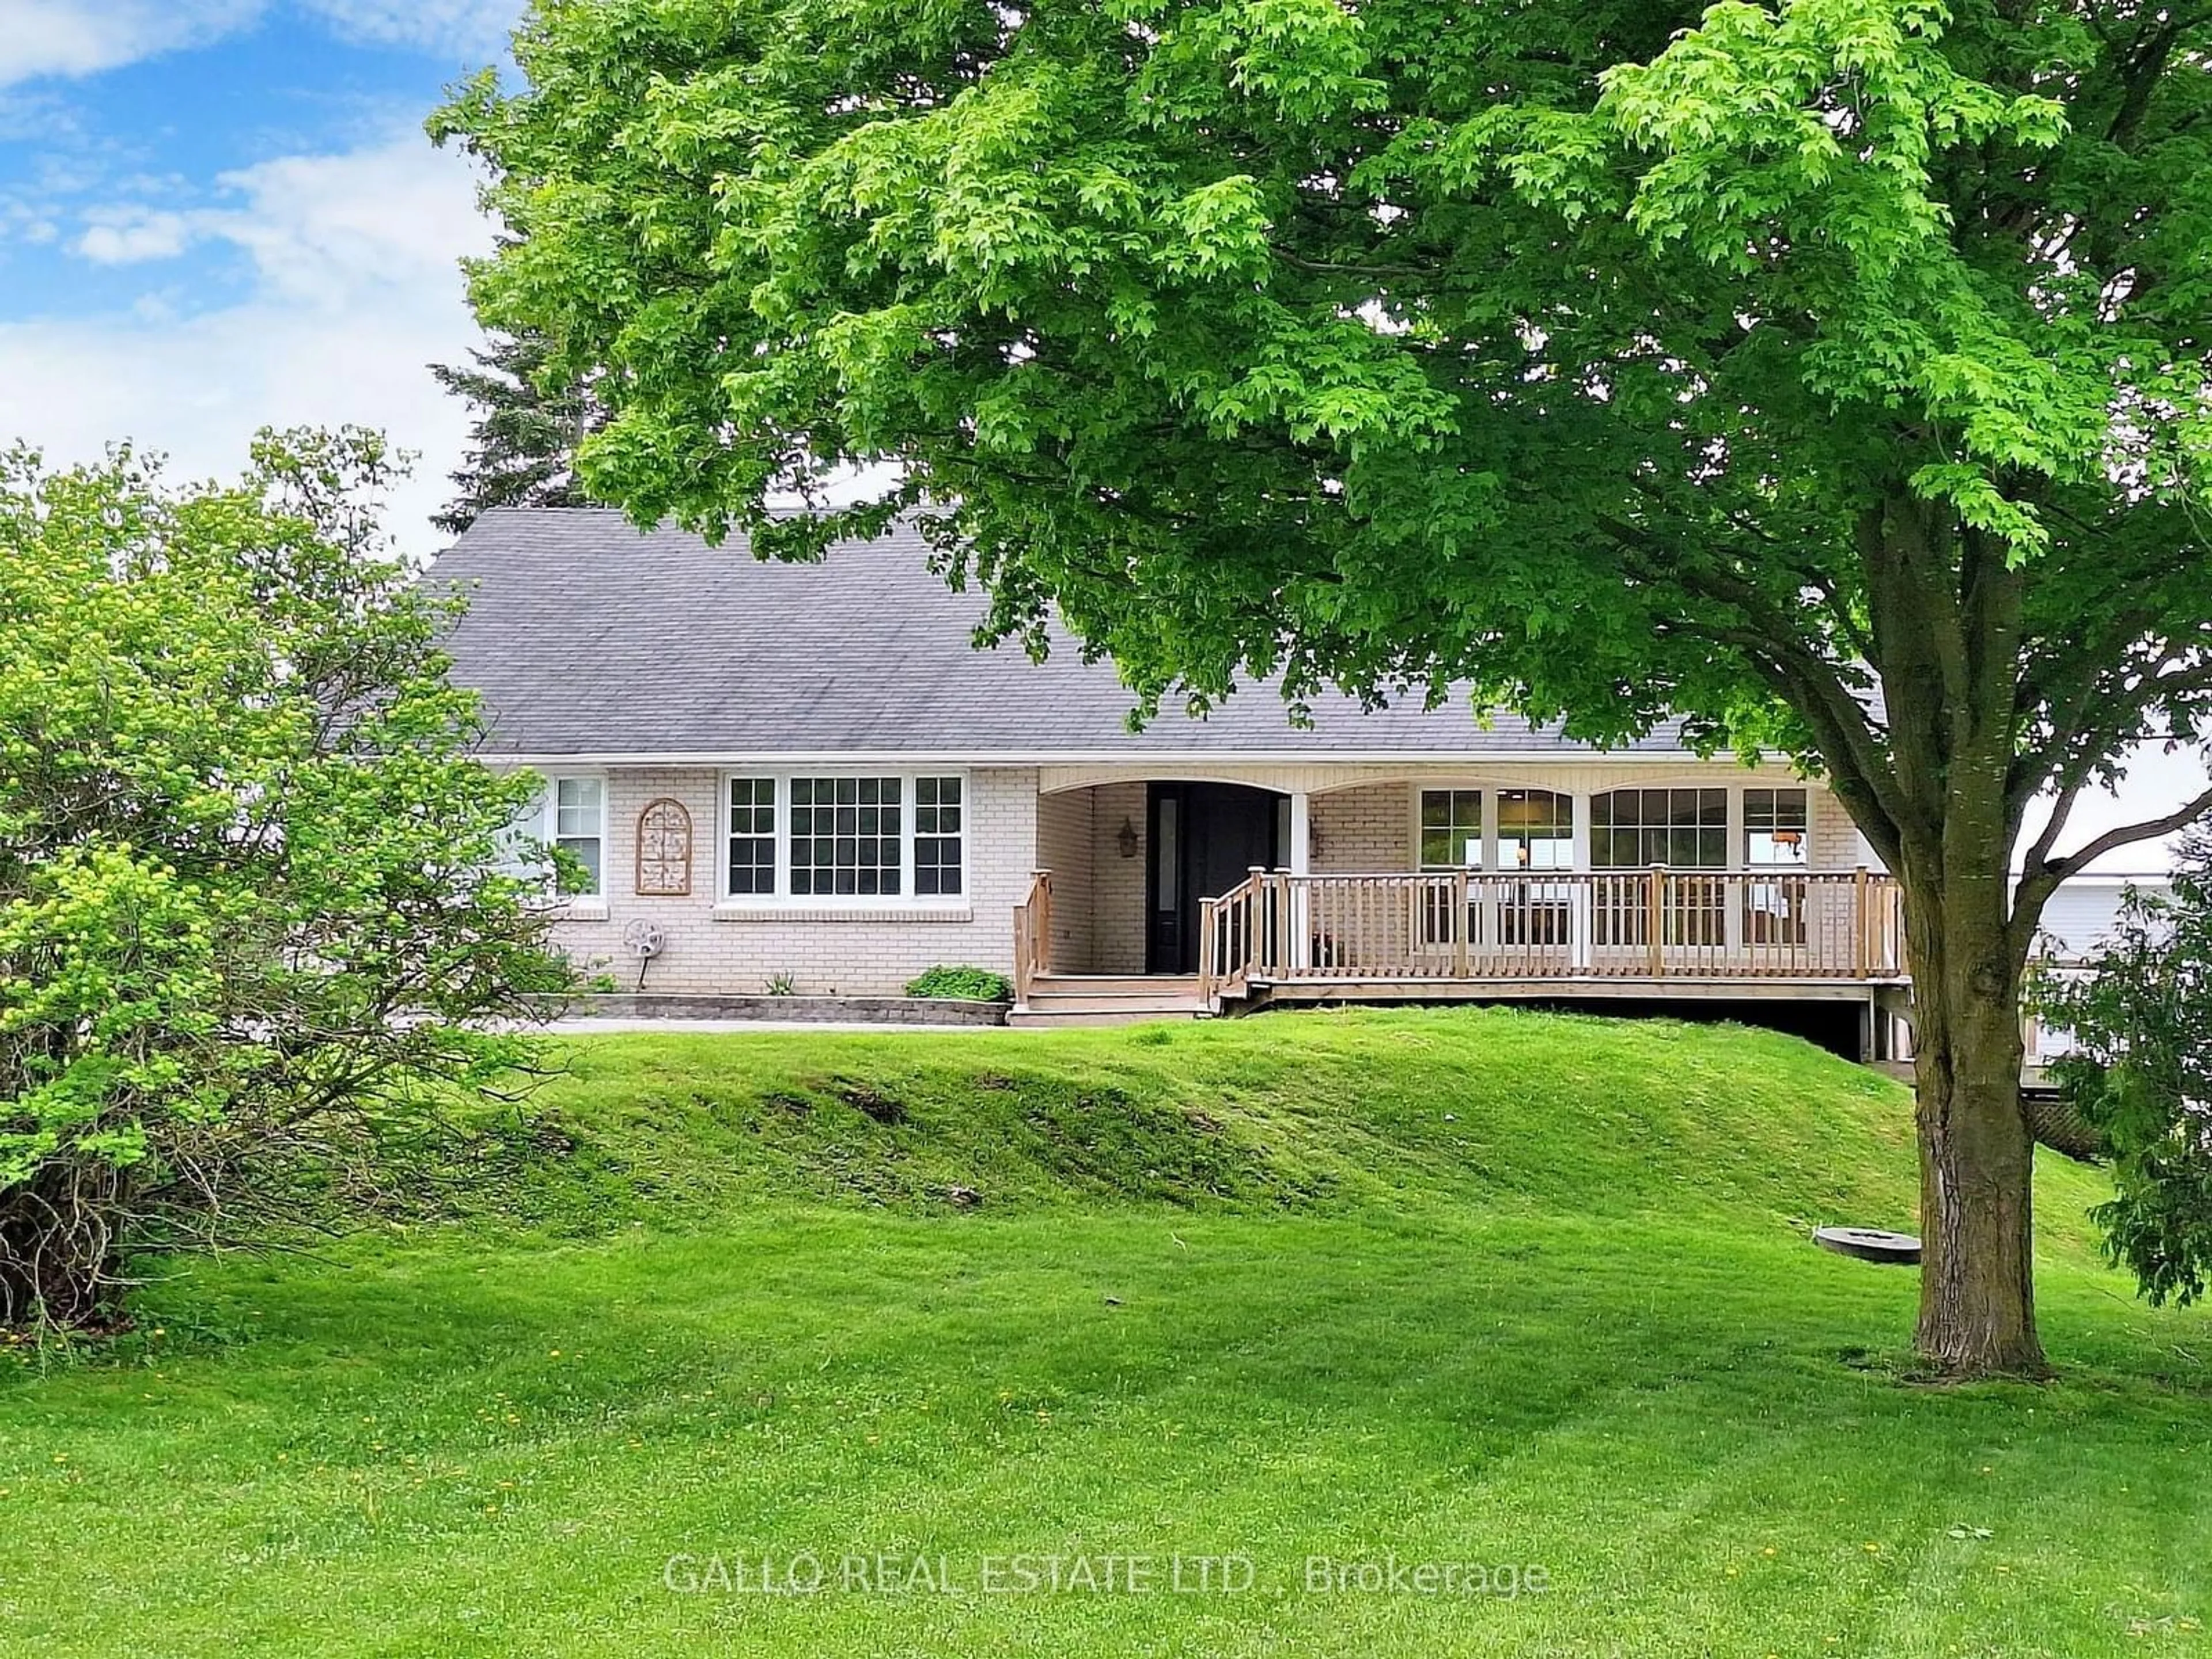 Frontside or backside of a home for 19622 Centre St, East Gwillimbury Ontario L0G 1M0